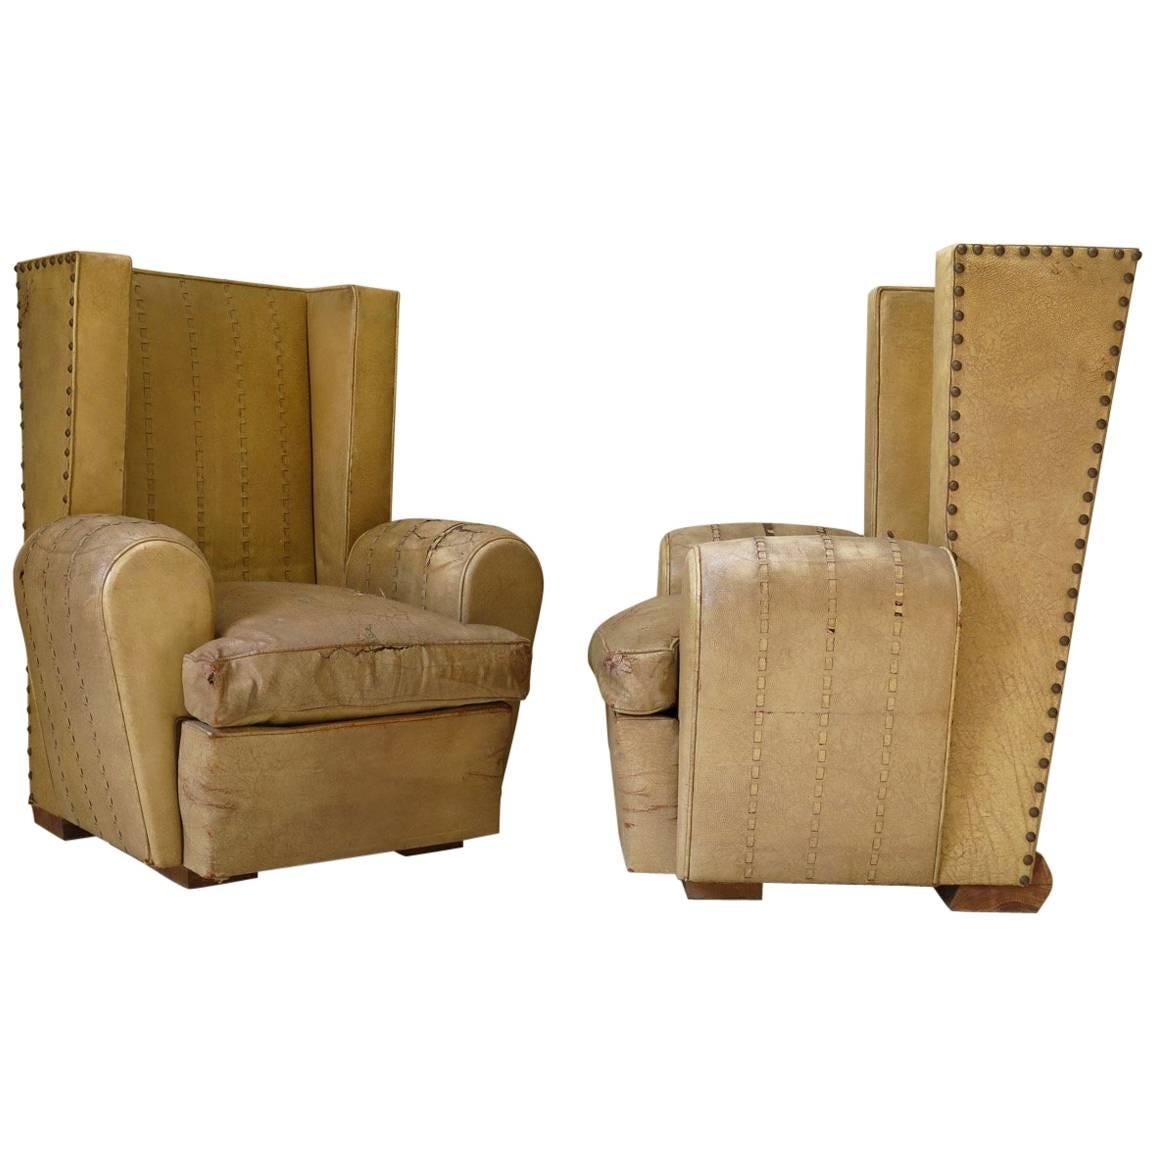 Pair of Art Deco Wingback Club Chairs, France, circa 1940s